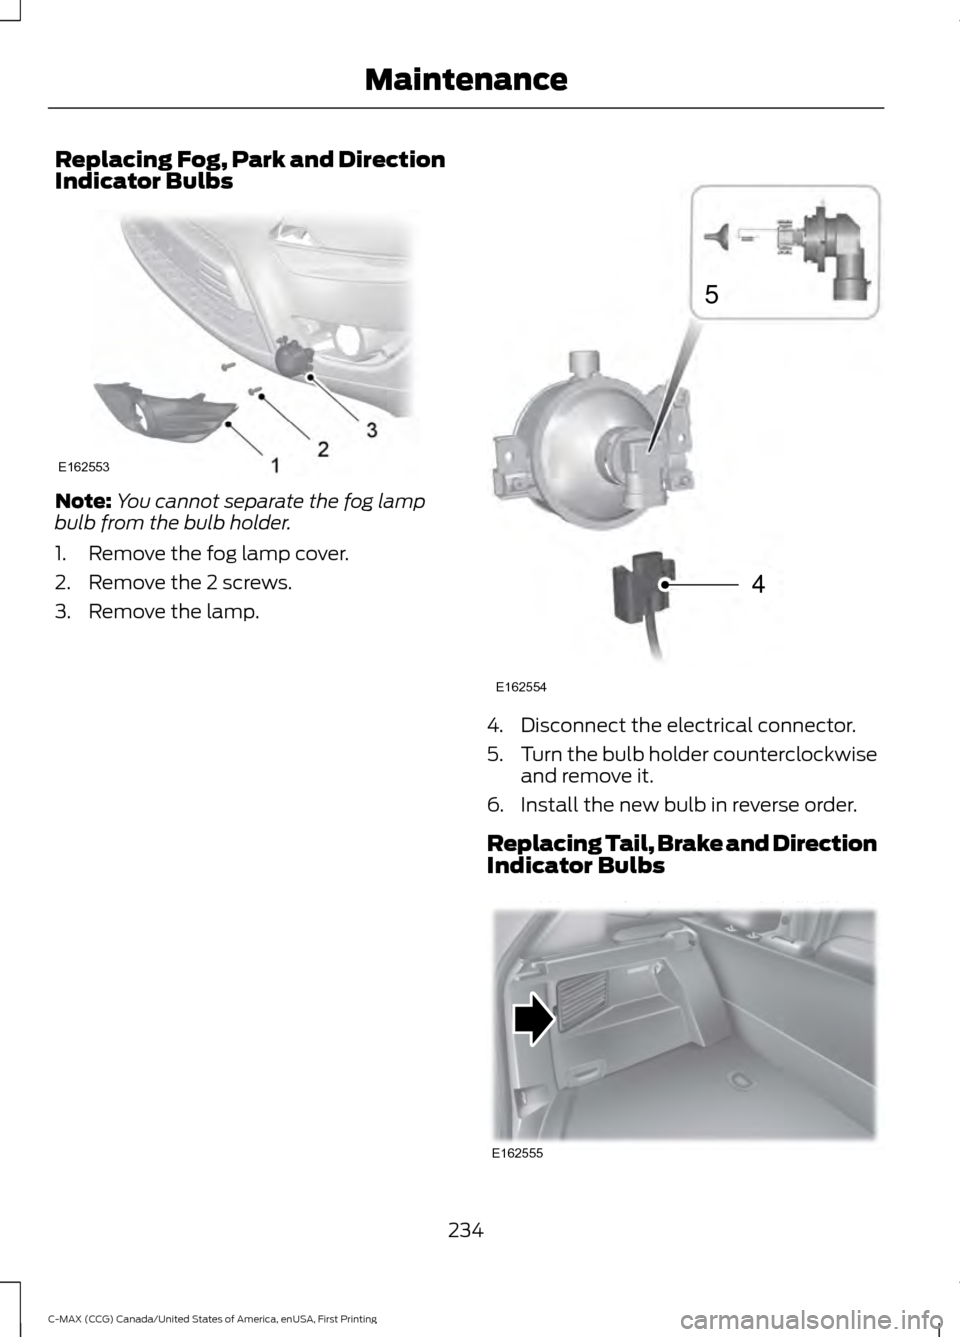 FORD C MAX HYBRID 2016 2.G Owners Manual Replacing Fog, Park and Direction
Indicator Bulbs
Note:
You cannot separate the fog lamp
bulb from the bulb holder.
1. Remove the fog lamp cover.
2. Remove the 2 screws.
3. Remove the lamp. 4. Disconn